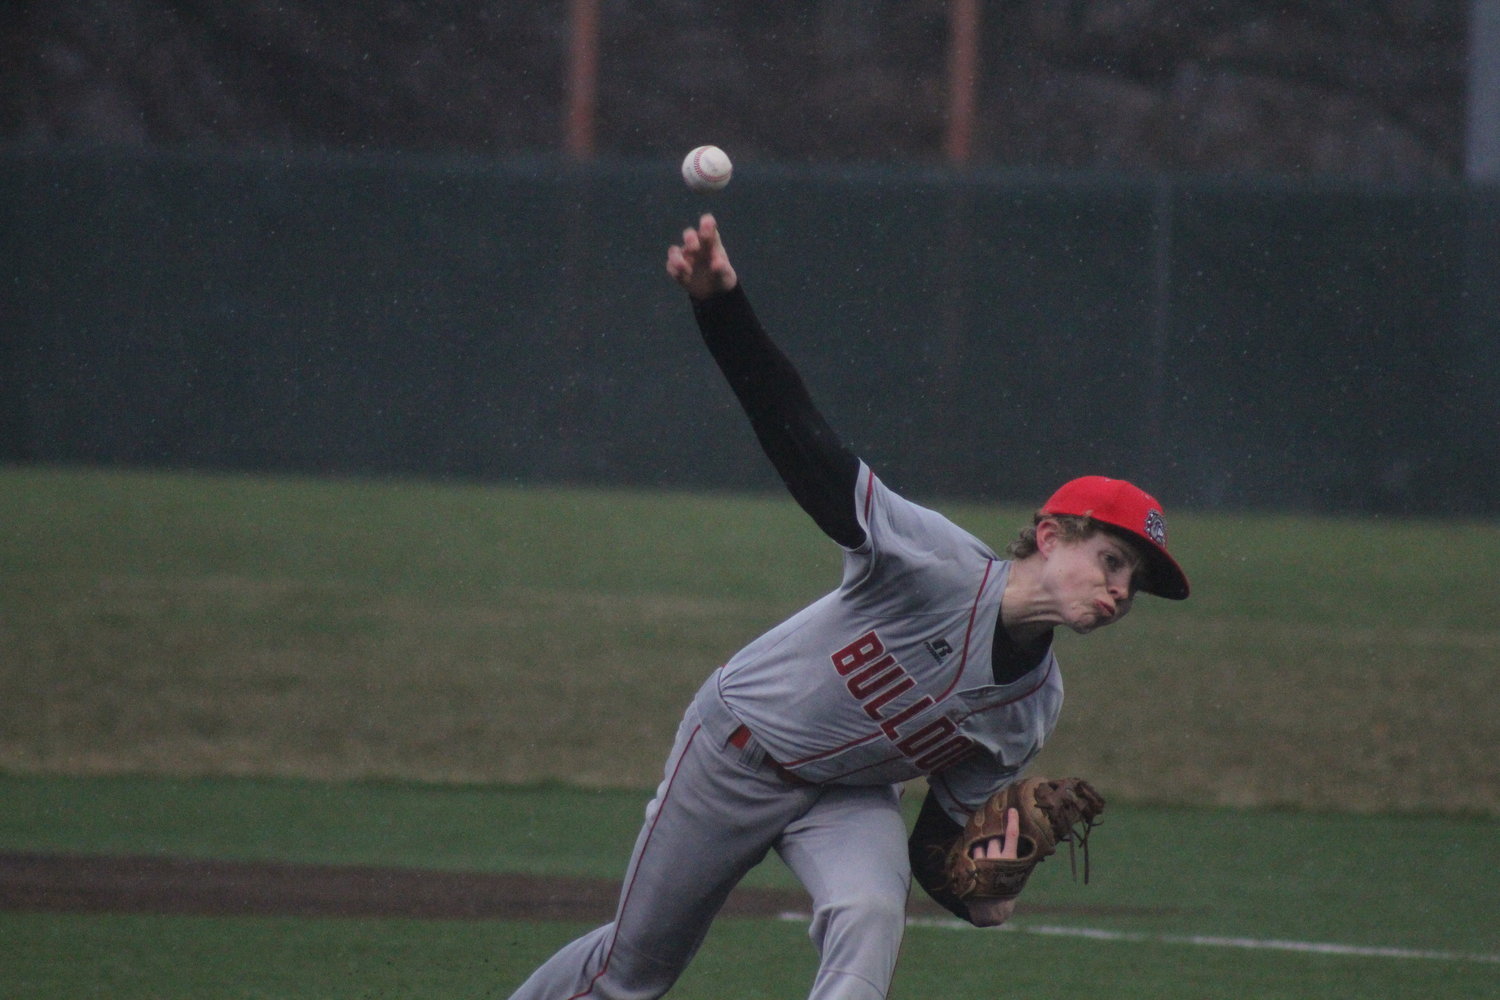 Mexico sophomore Sam Ryan releases a pitch against Eldon on Friday in Mexico.